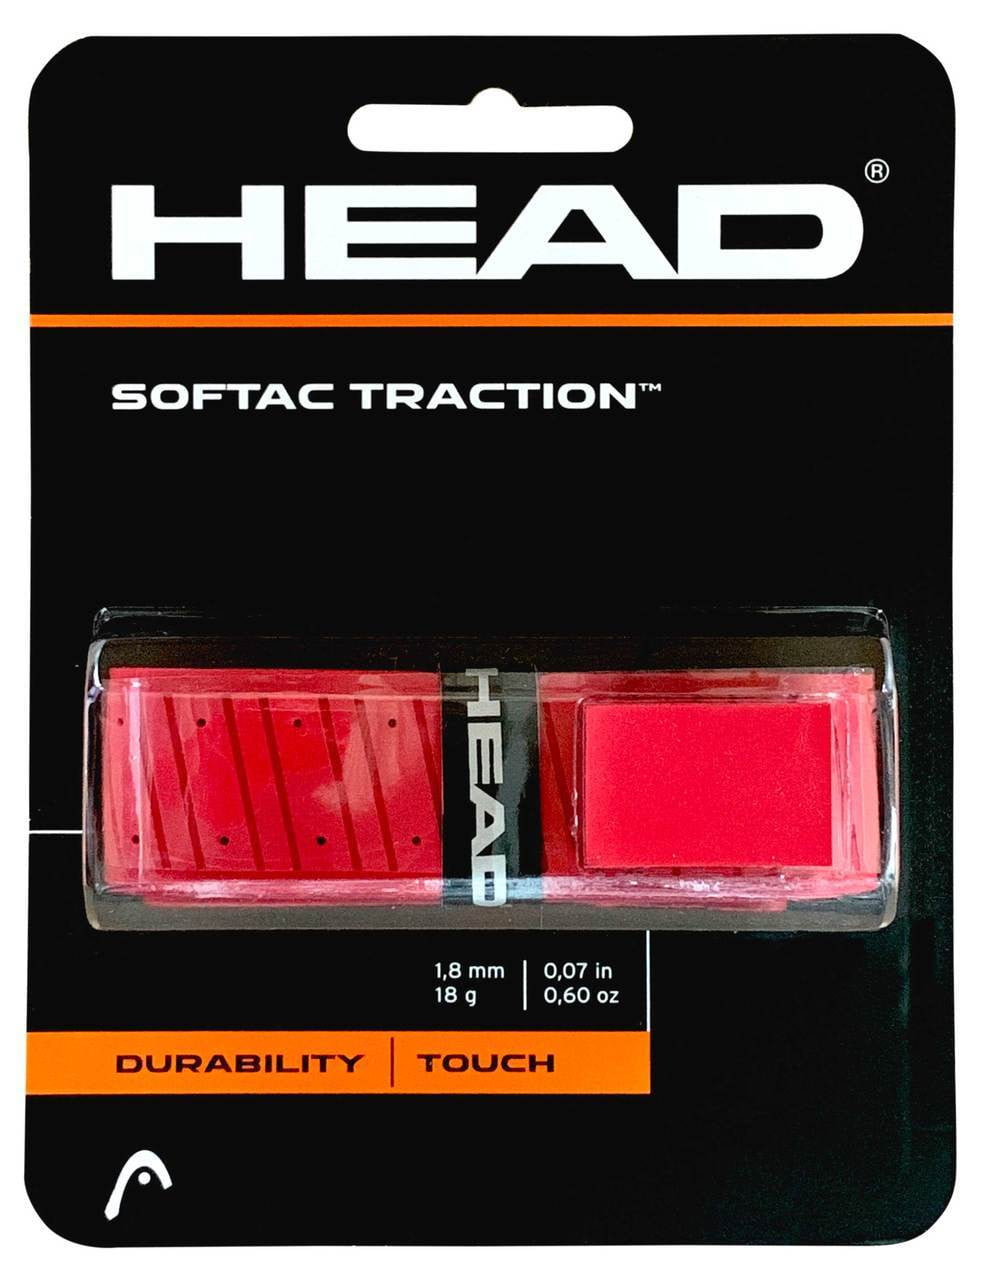 Head Softac Traction Grip - Replacement grip - Head - ATR Sports